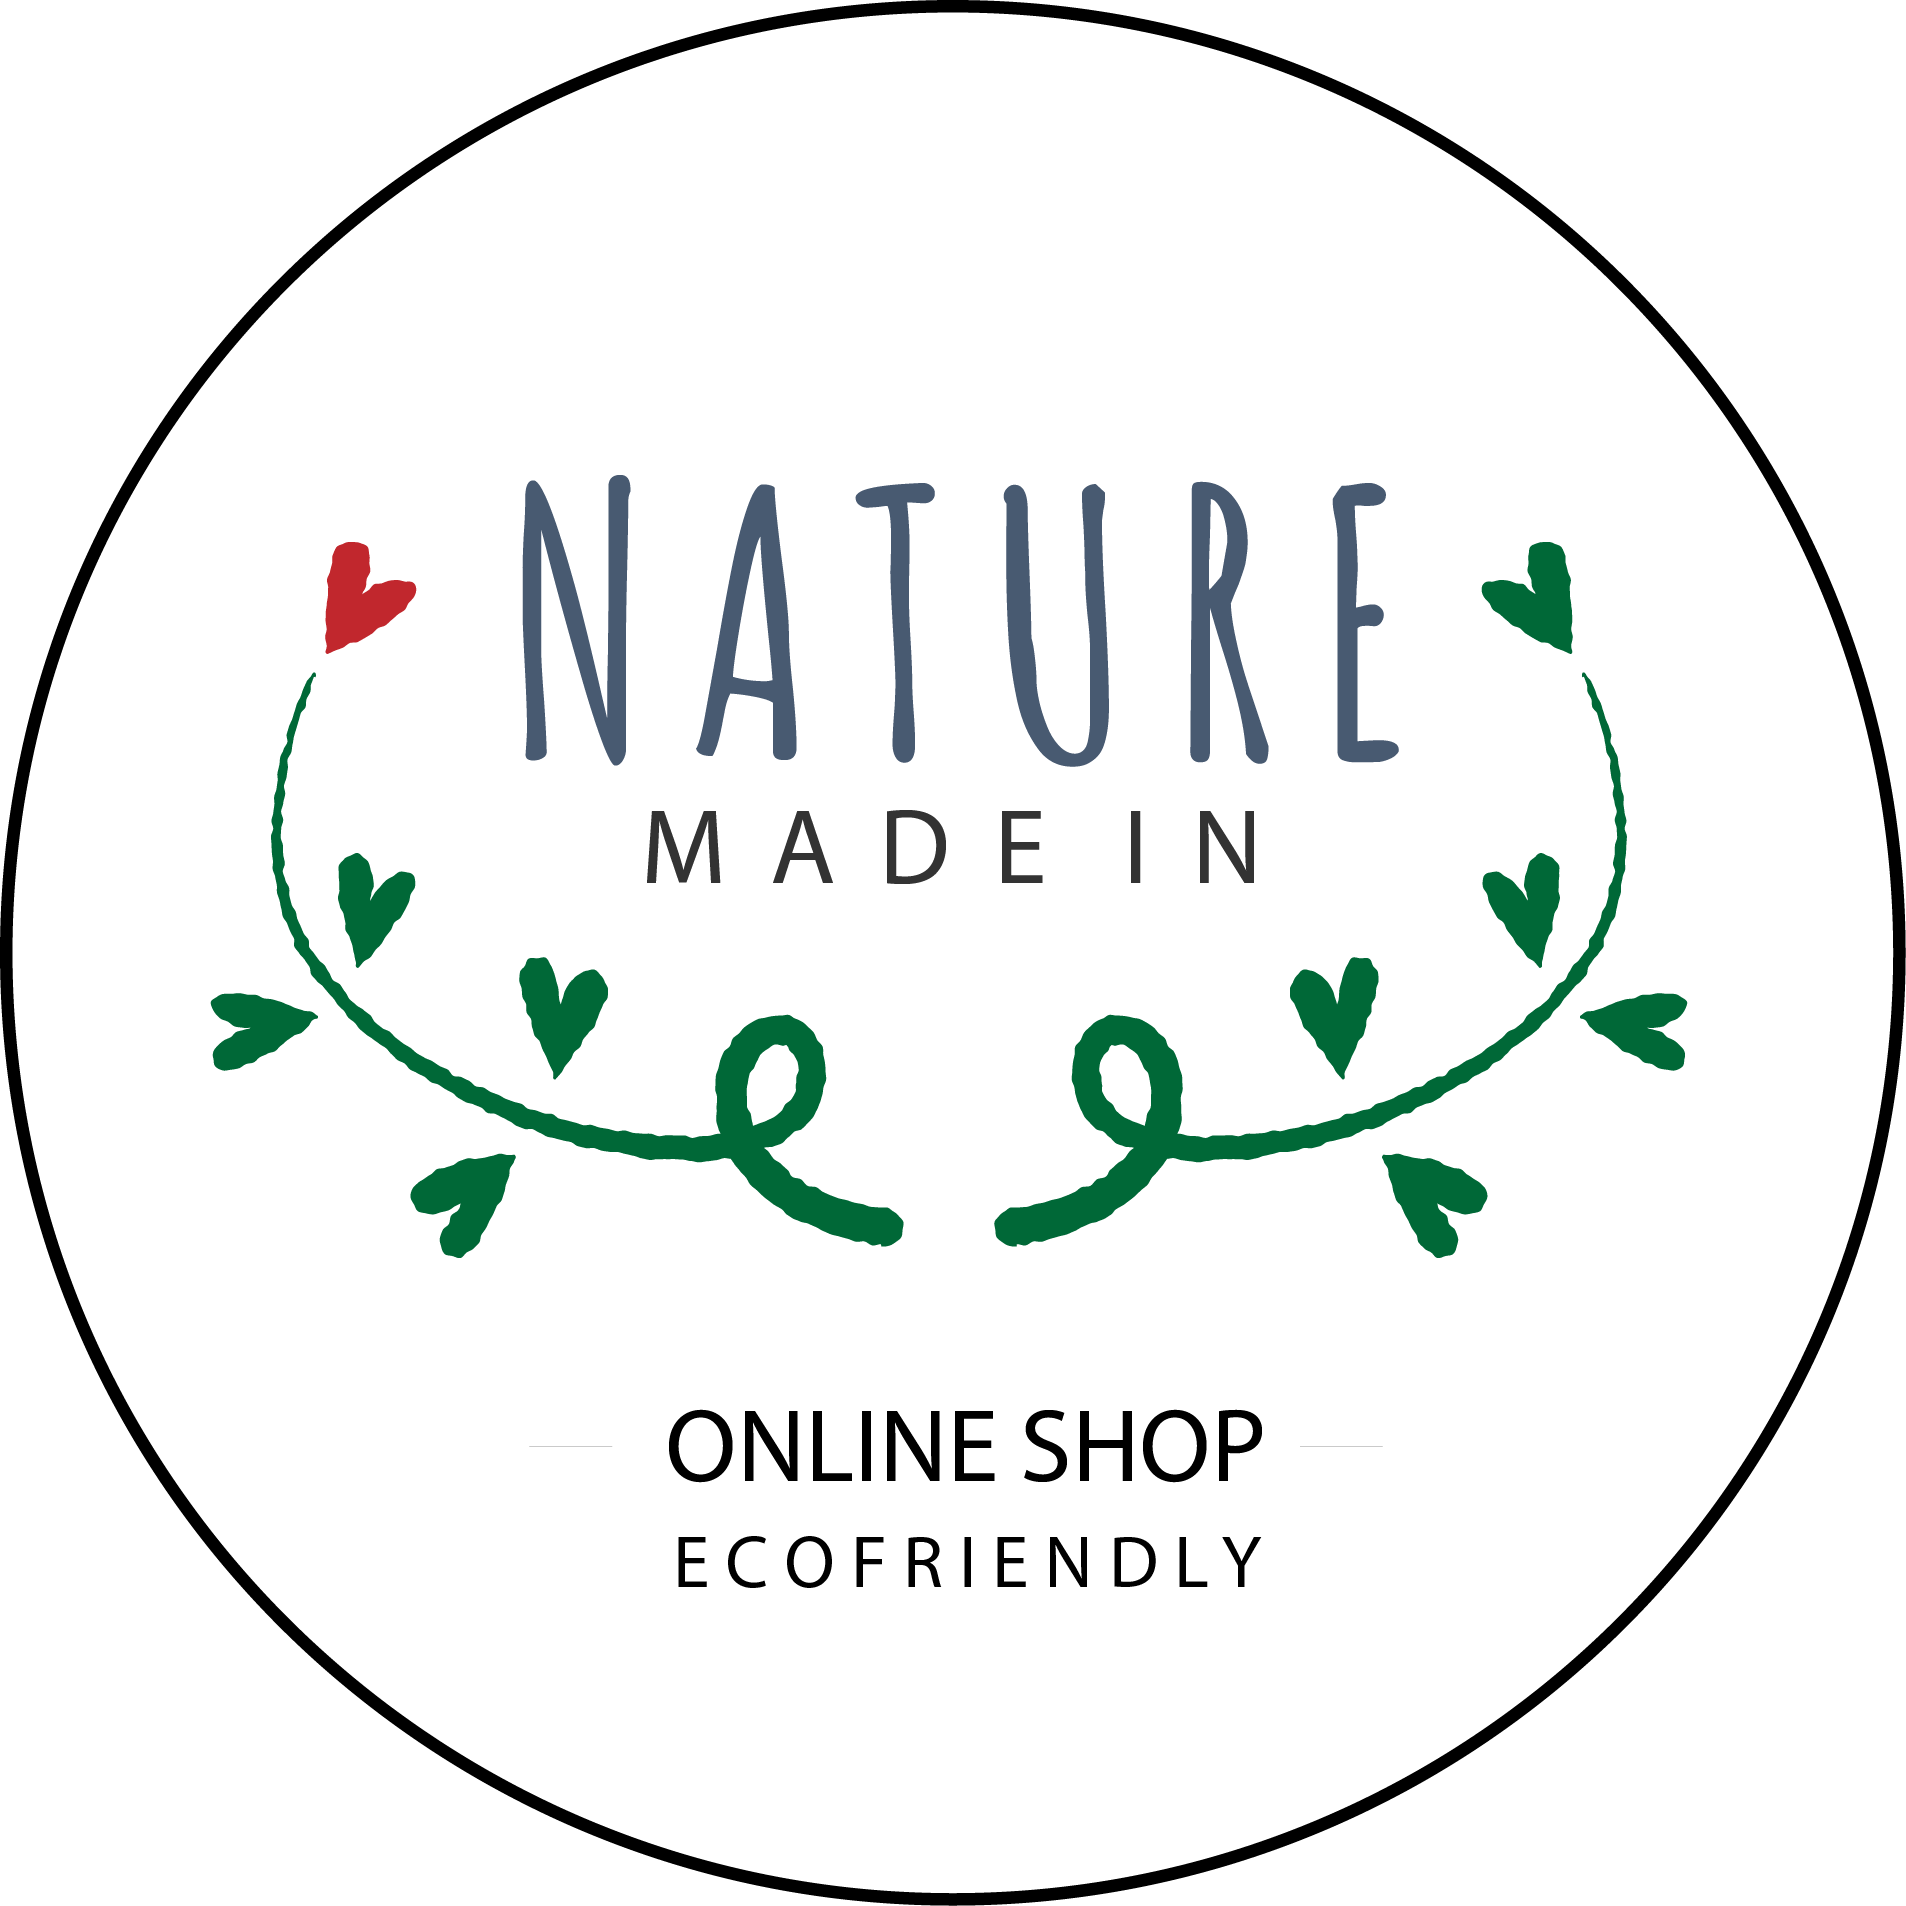 Parceiro Made in Nature - Ecoshop